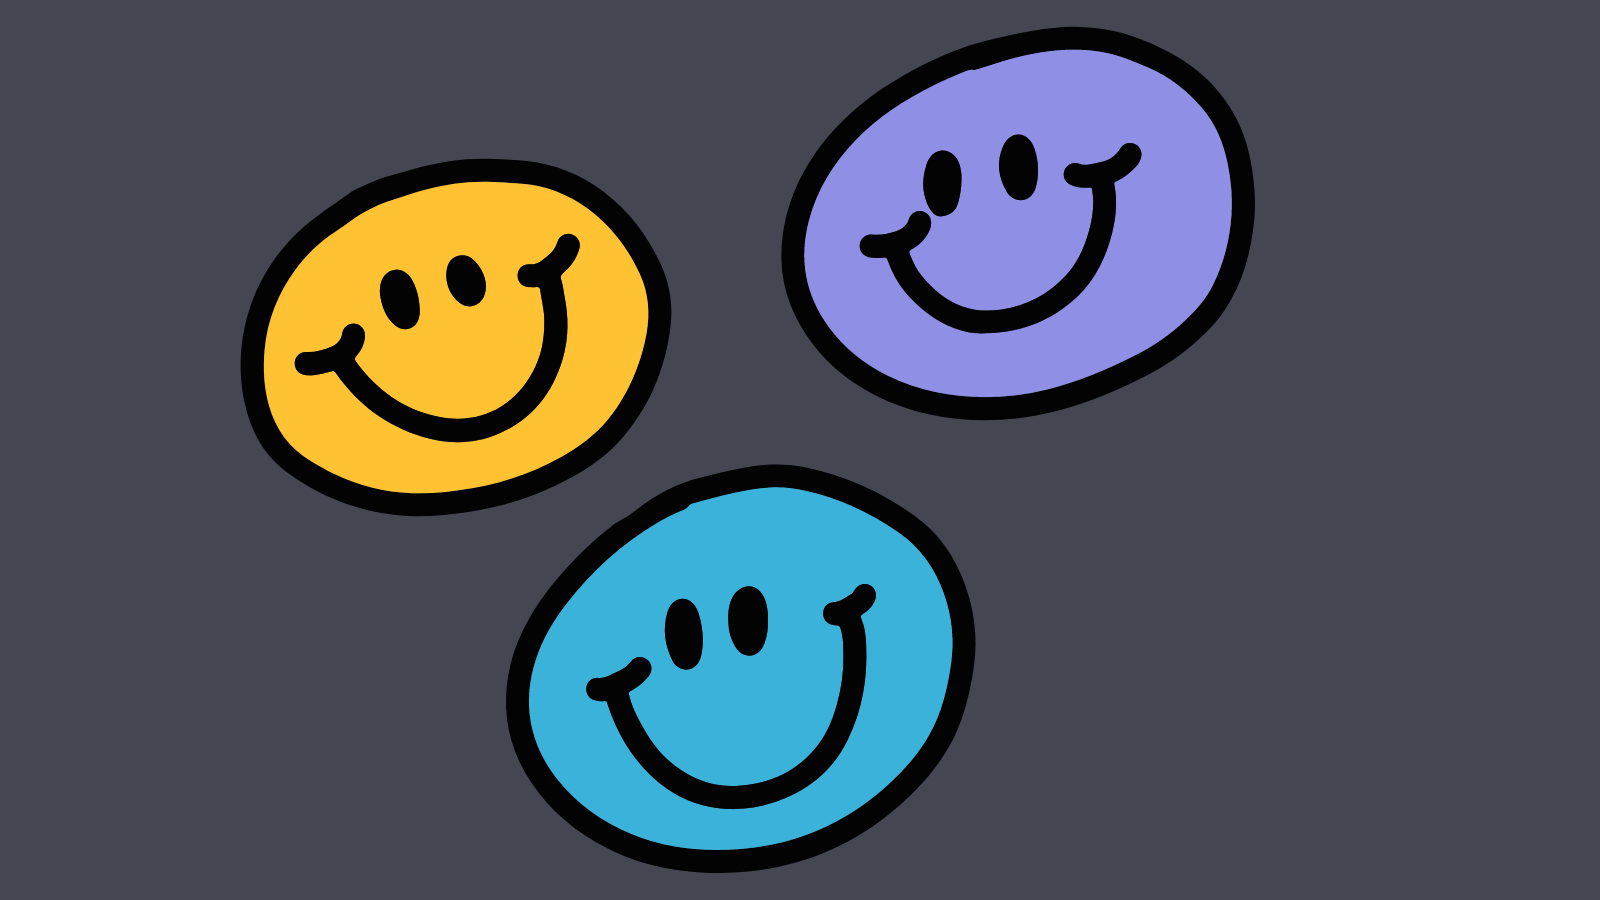 Three different-colored smiley faces